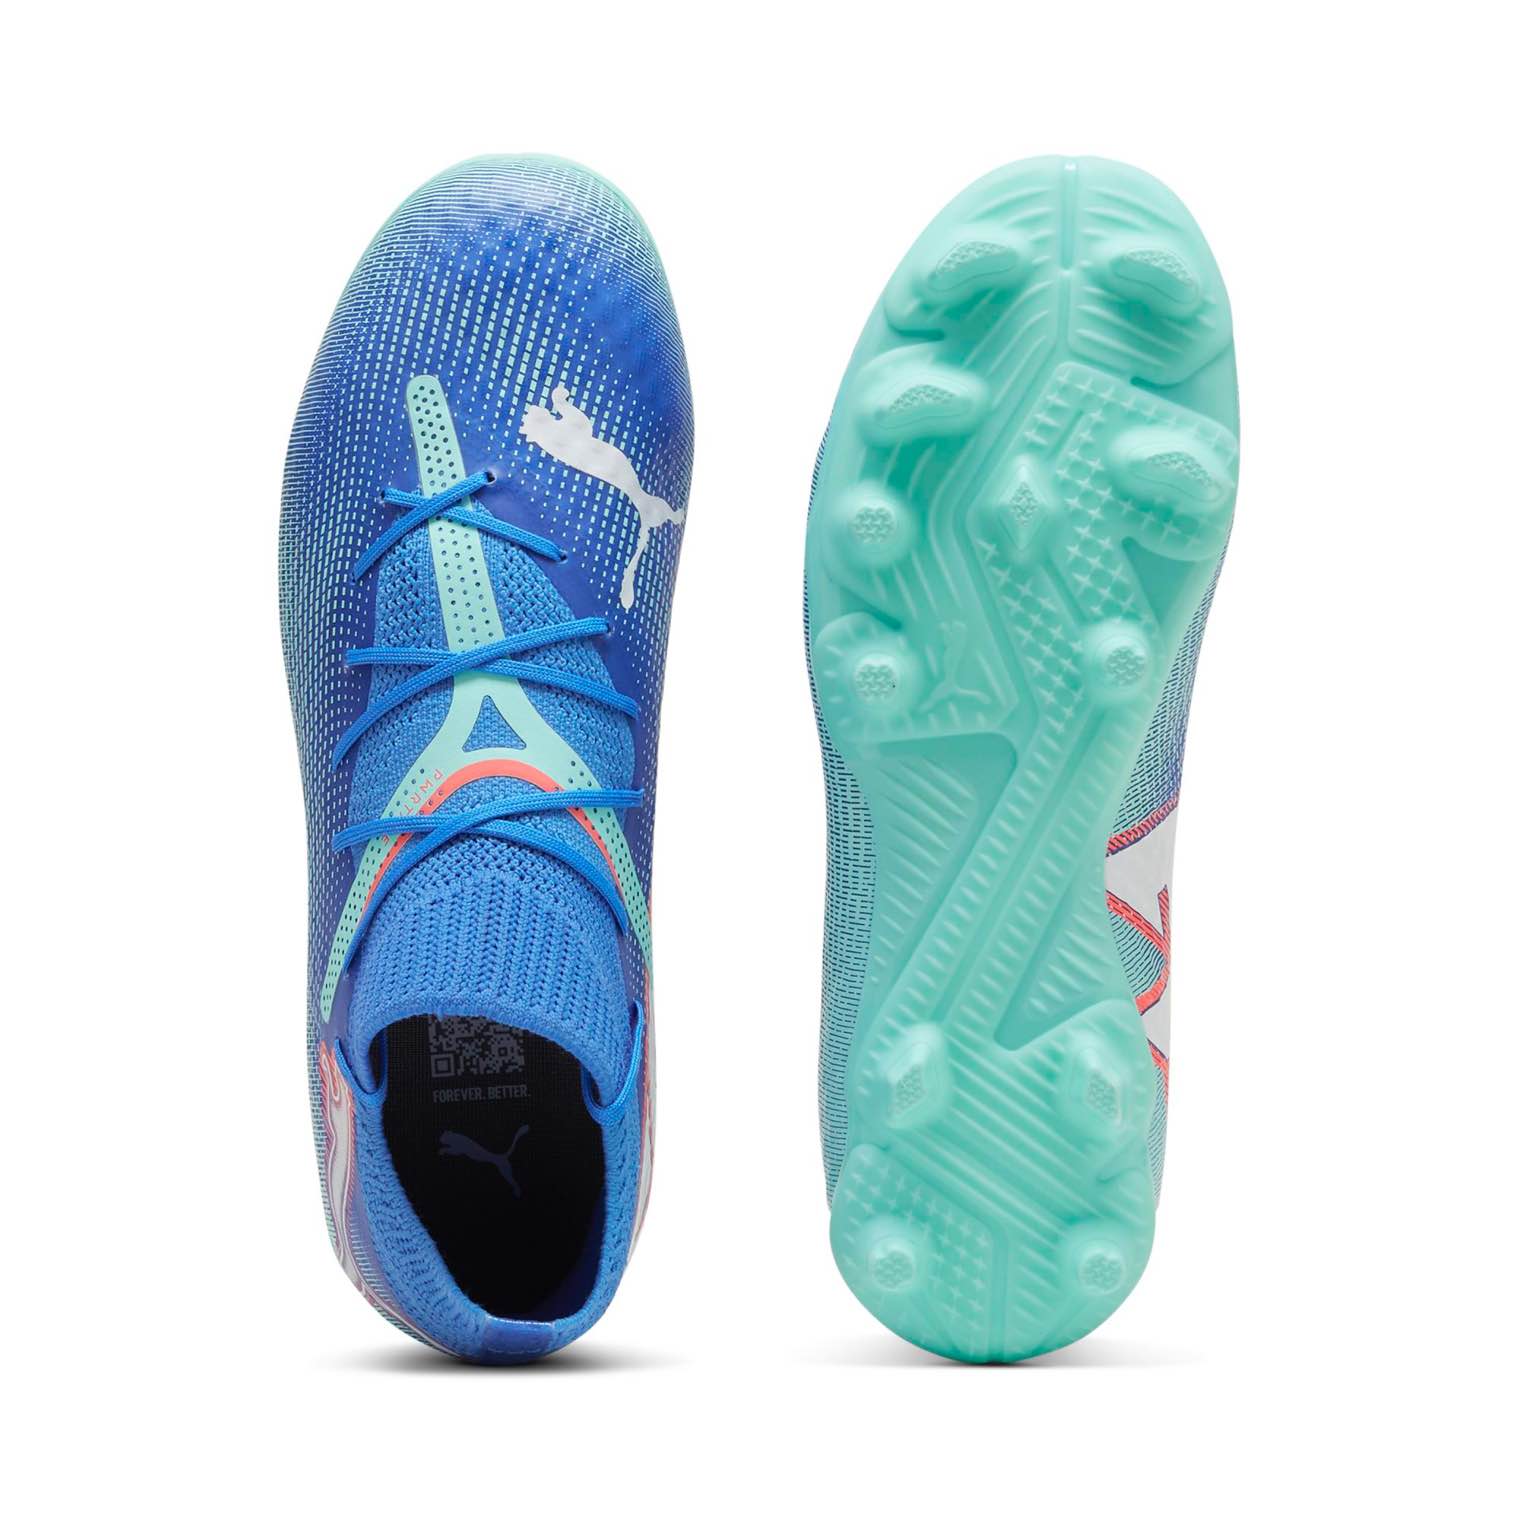 PUMA FUTURE 7 Pro Jr. soccer cleats with adaptive fit and superior traction